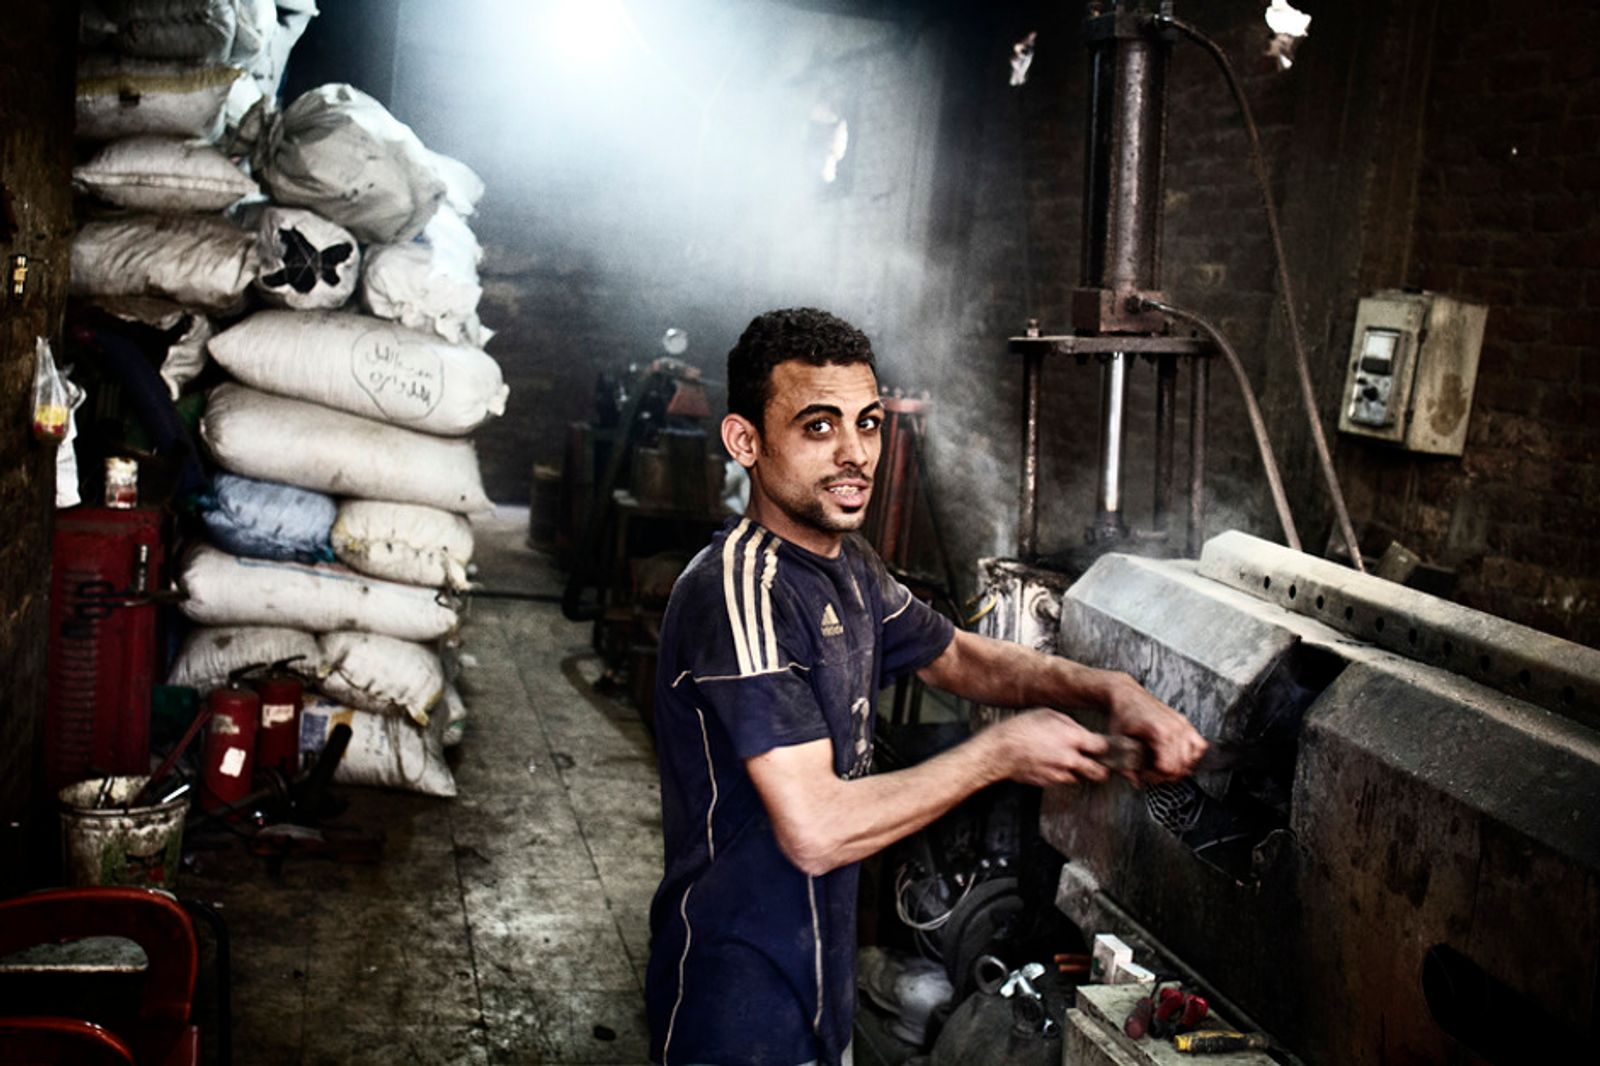 © Manel Quiros - Image from the MANSHIYAT NASER: The Garbage City photography project